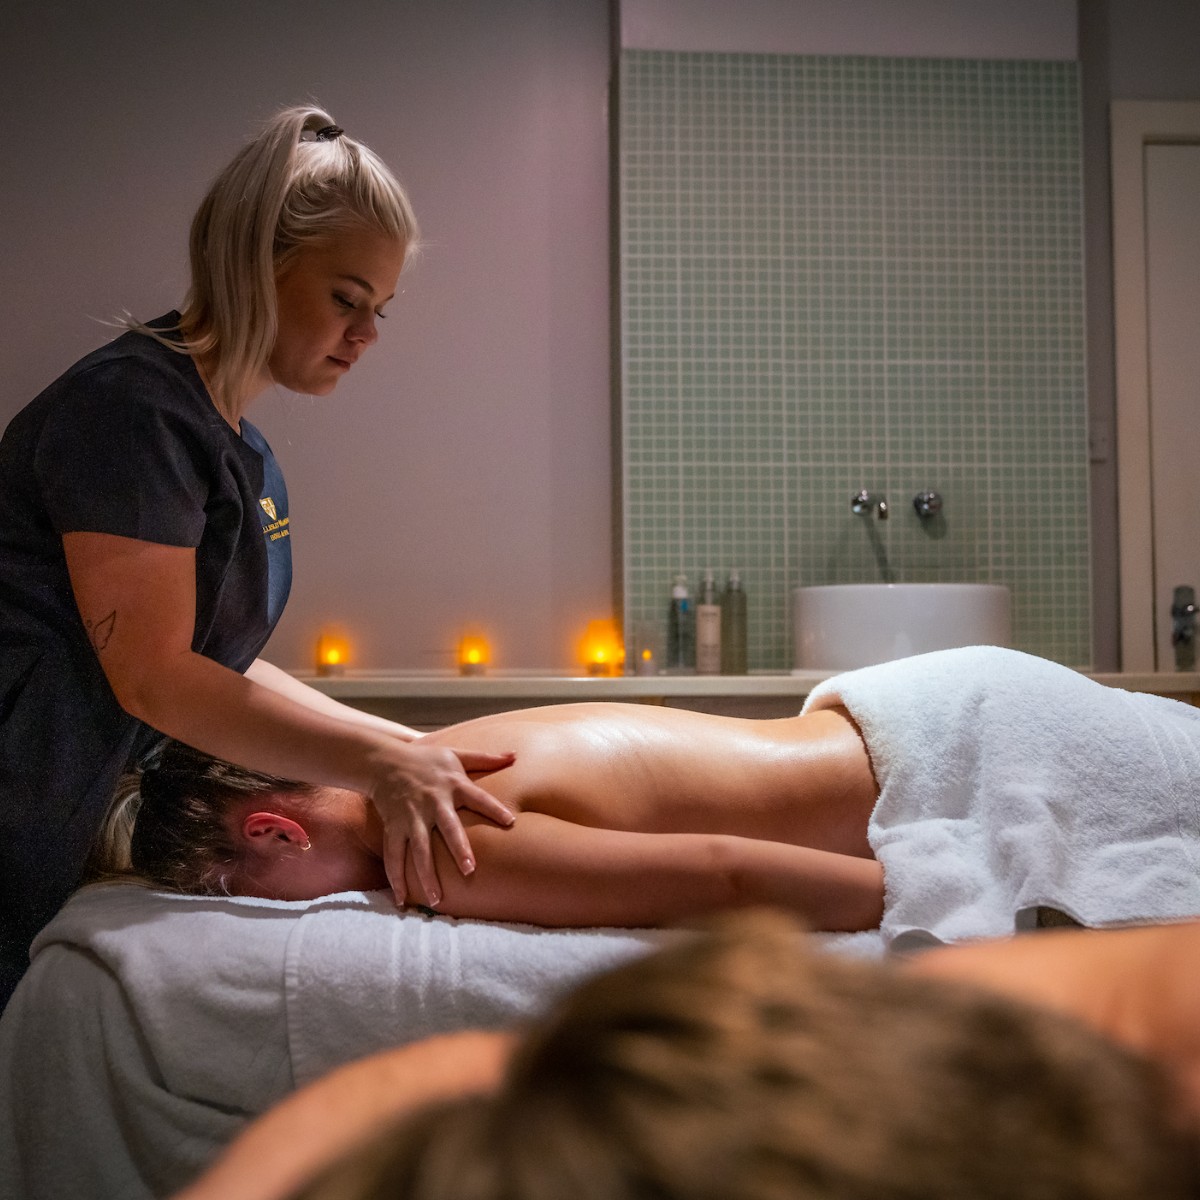 At #BillesleyManor, we have everything you need to feel pampered and rejuvenated. Our #spa offers a variety of relaxing treatments, including a refreshing pool, luxurious sauna and steam room perfect for those days when you want to unwind!